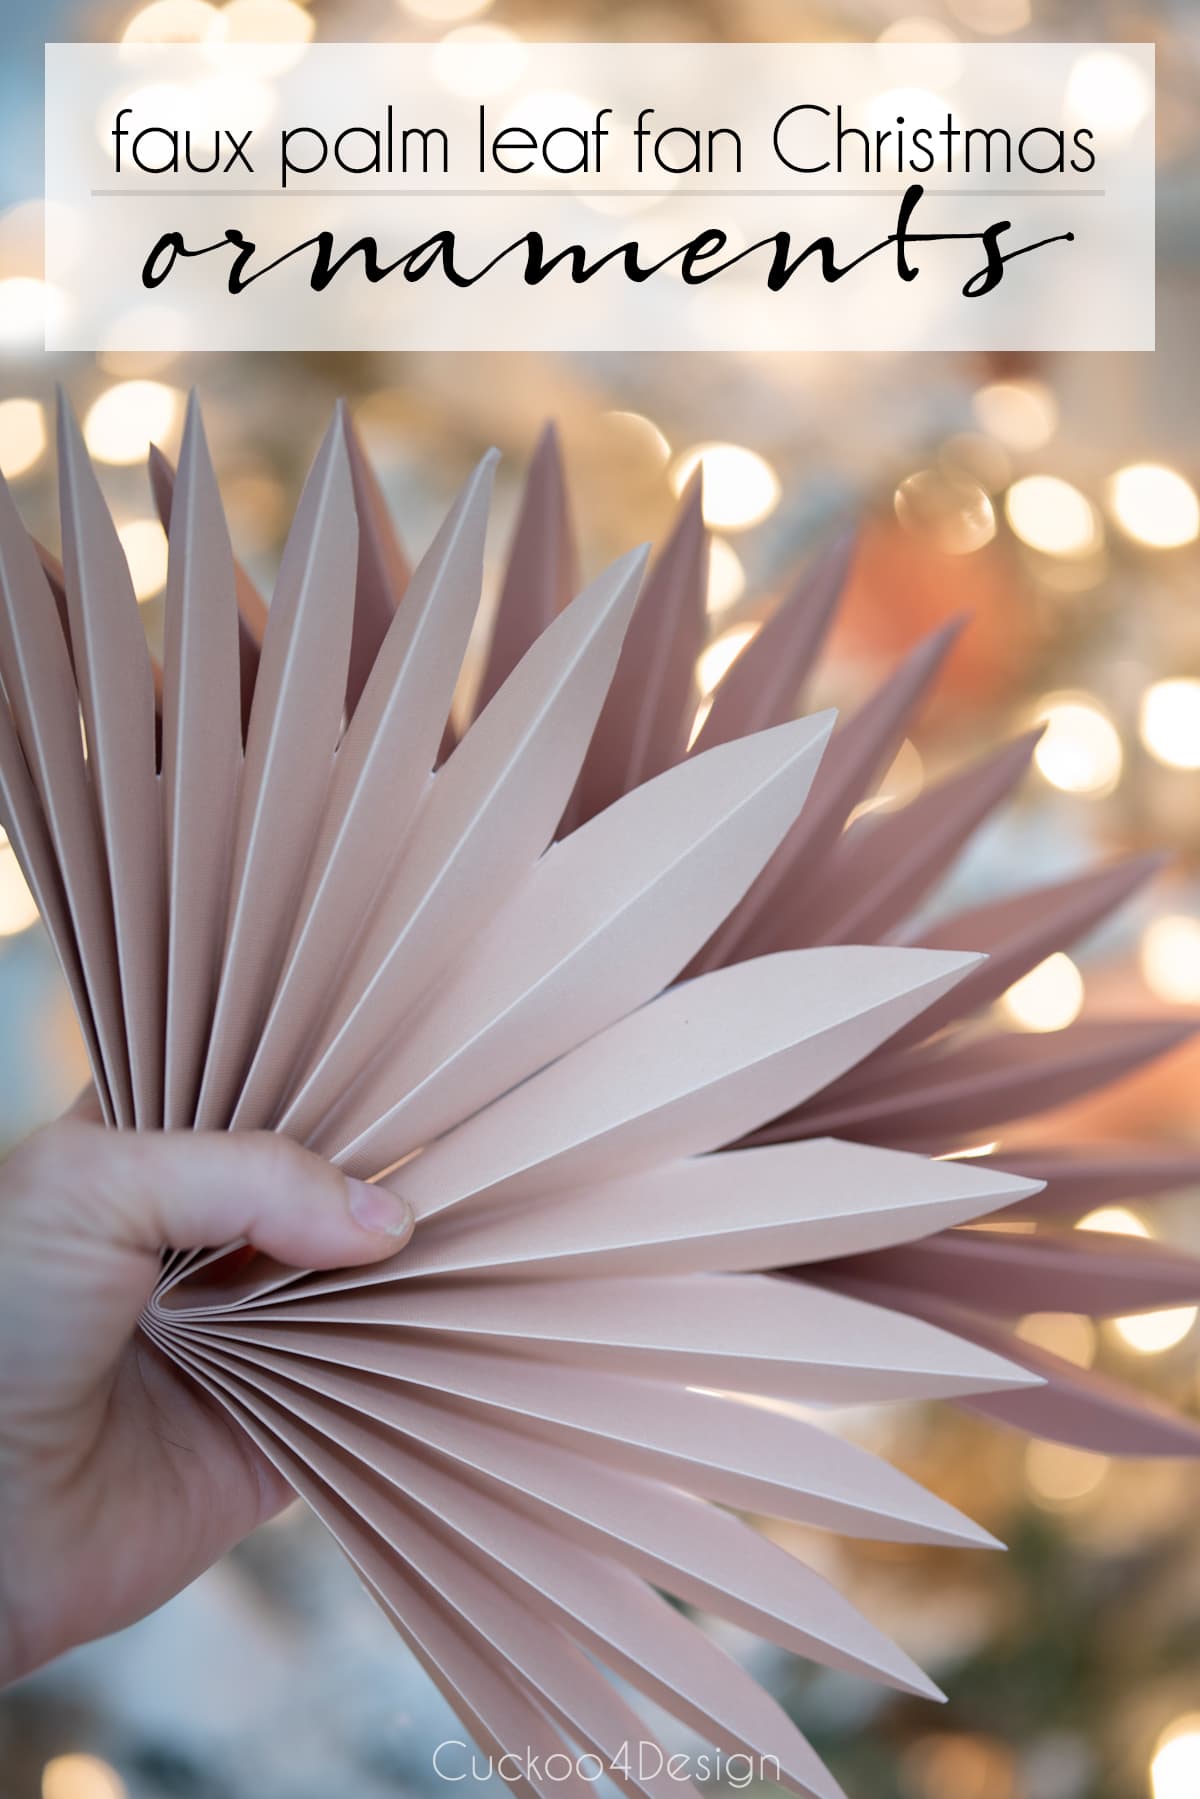 Paper fan decorations inspired by faux sun palm leaves